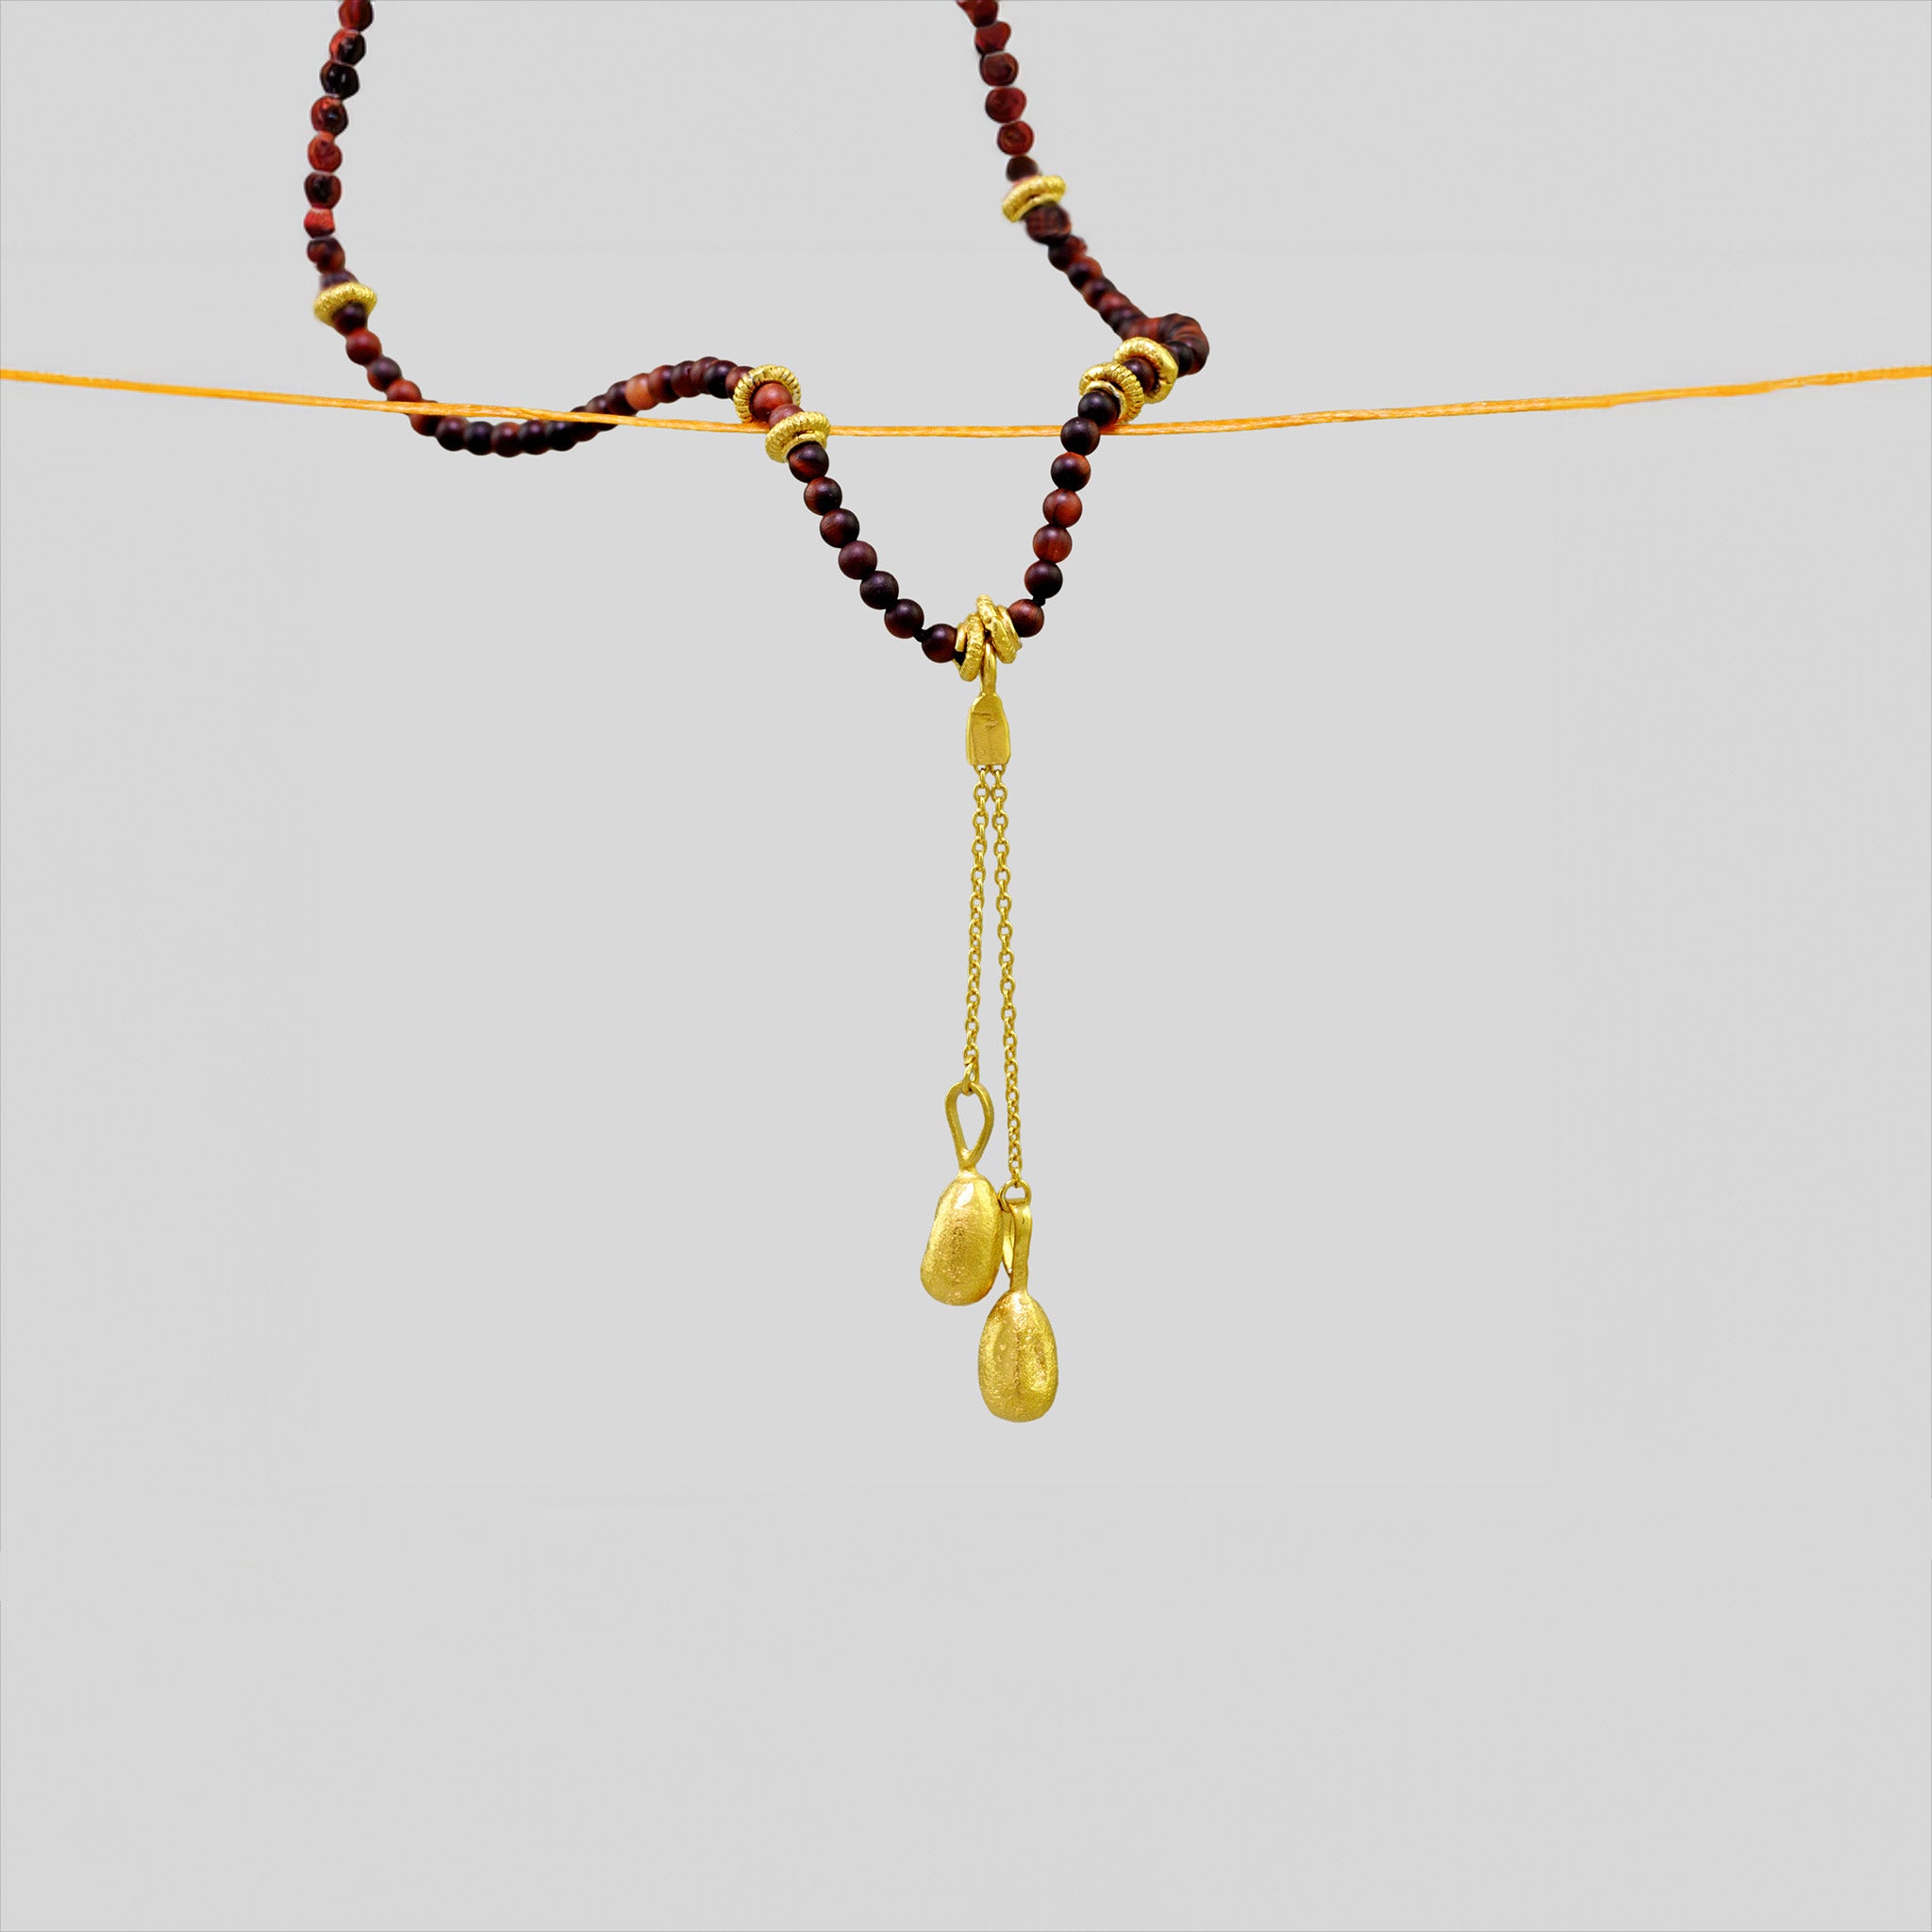 Dark Jasper Necklace with Gold Seeds pendant, featuring natural charm and elegance.